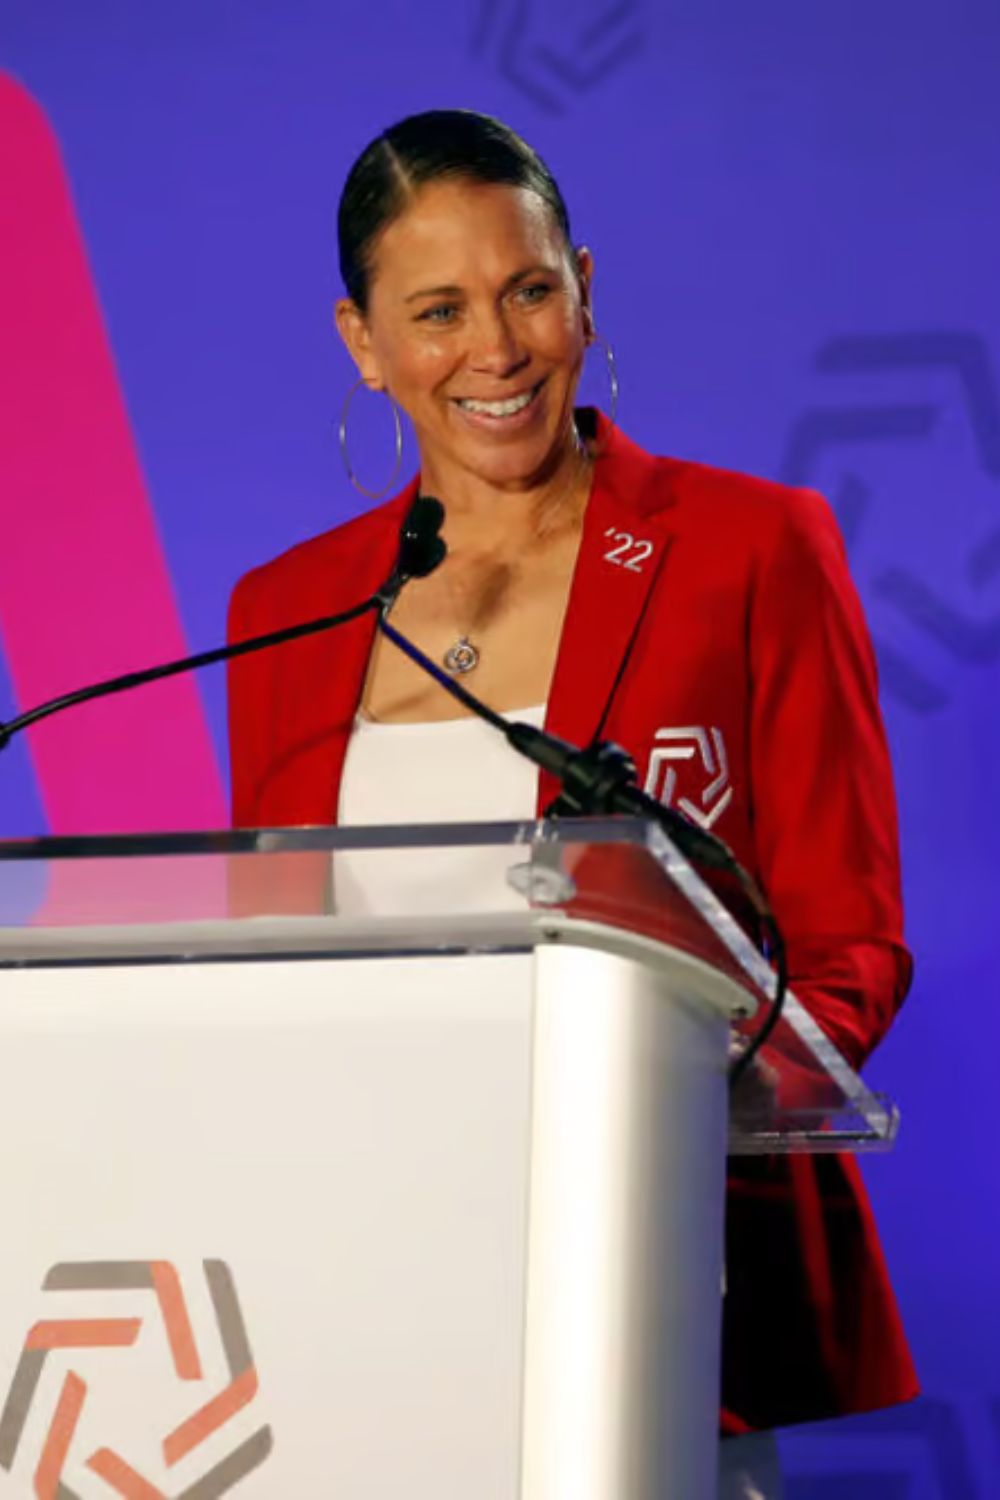 Shannon Boxx Is The 2022 National Soccer Hall of Famer